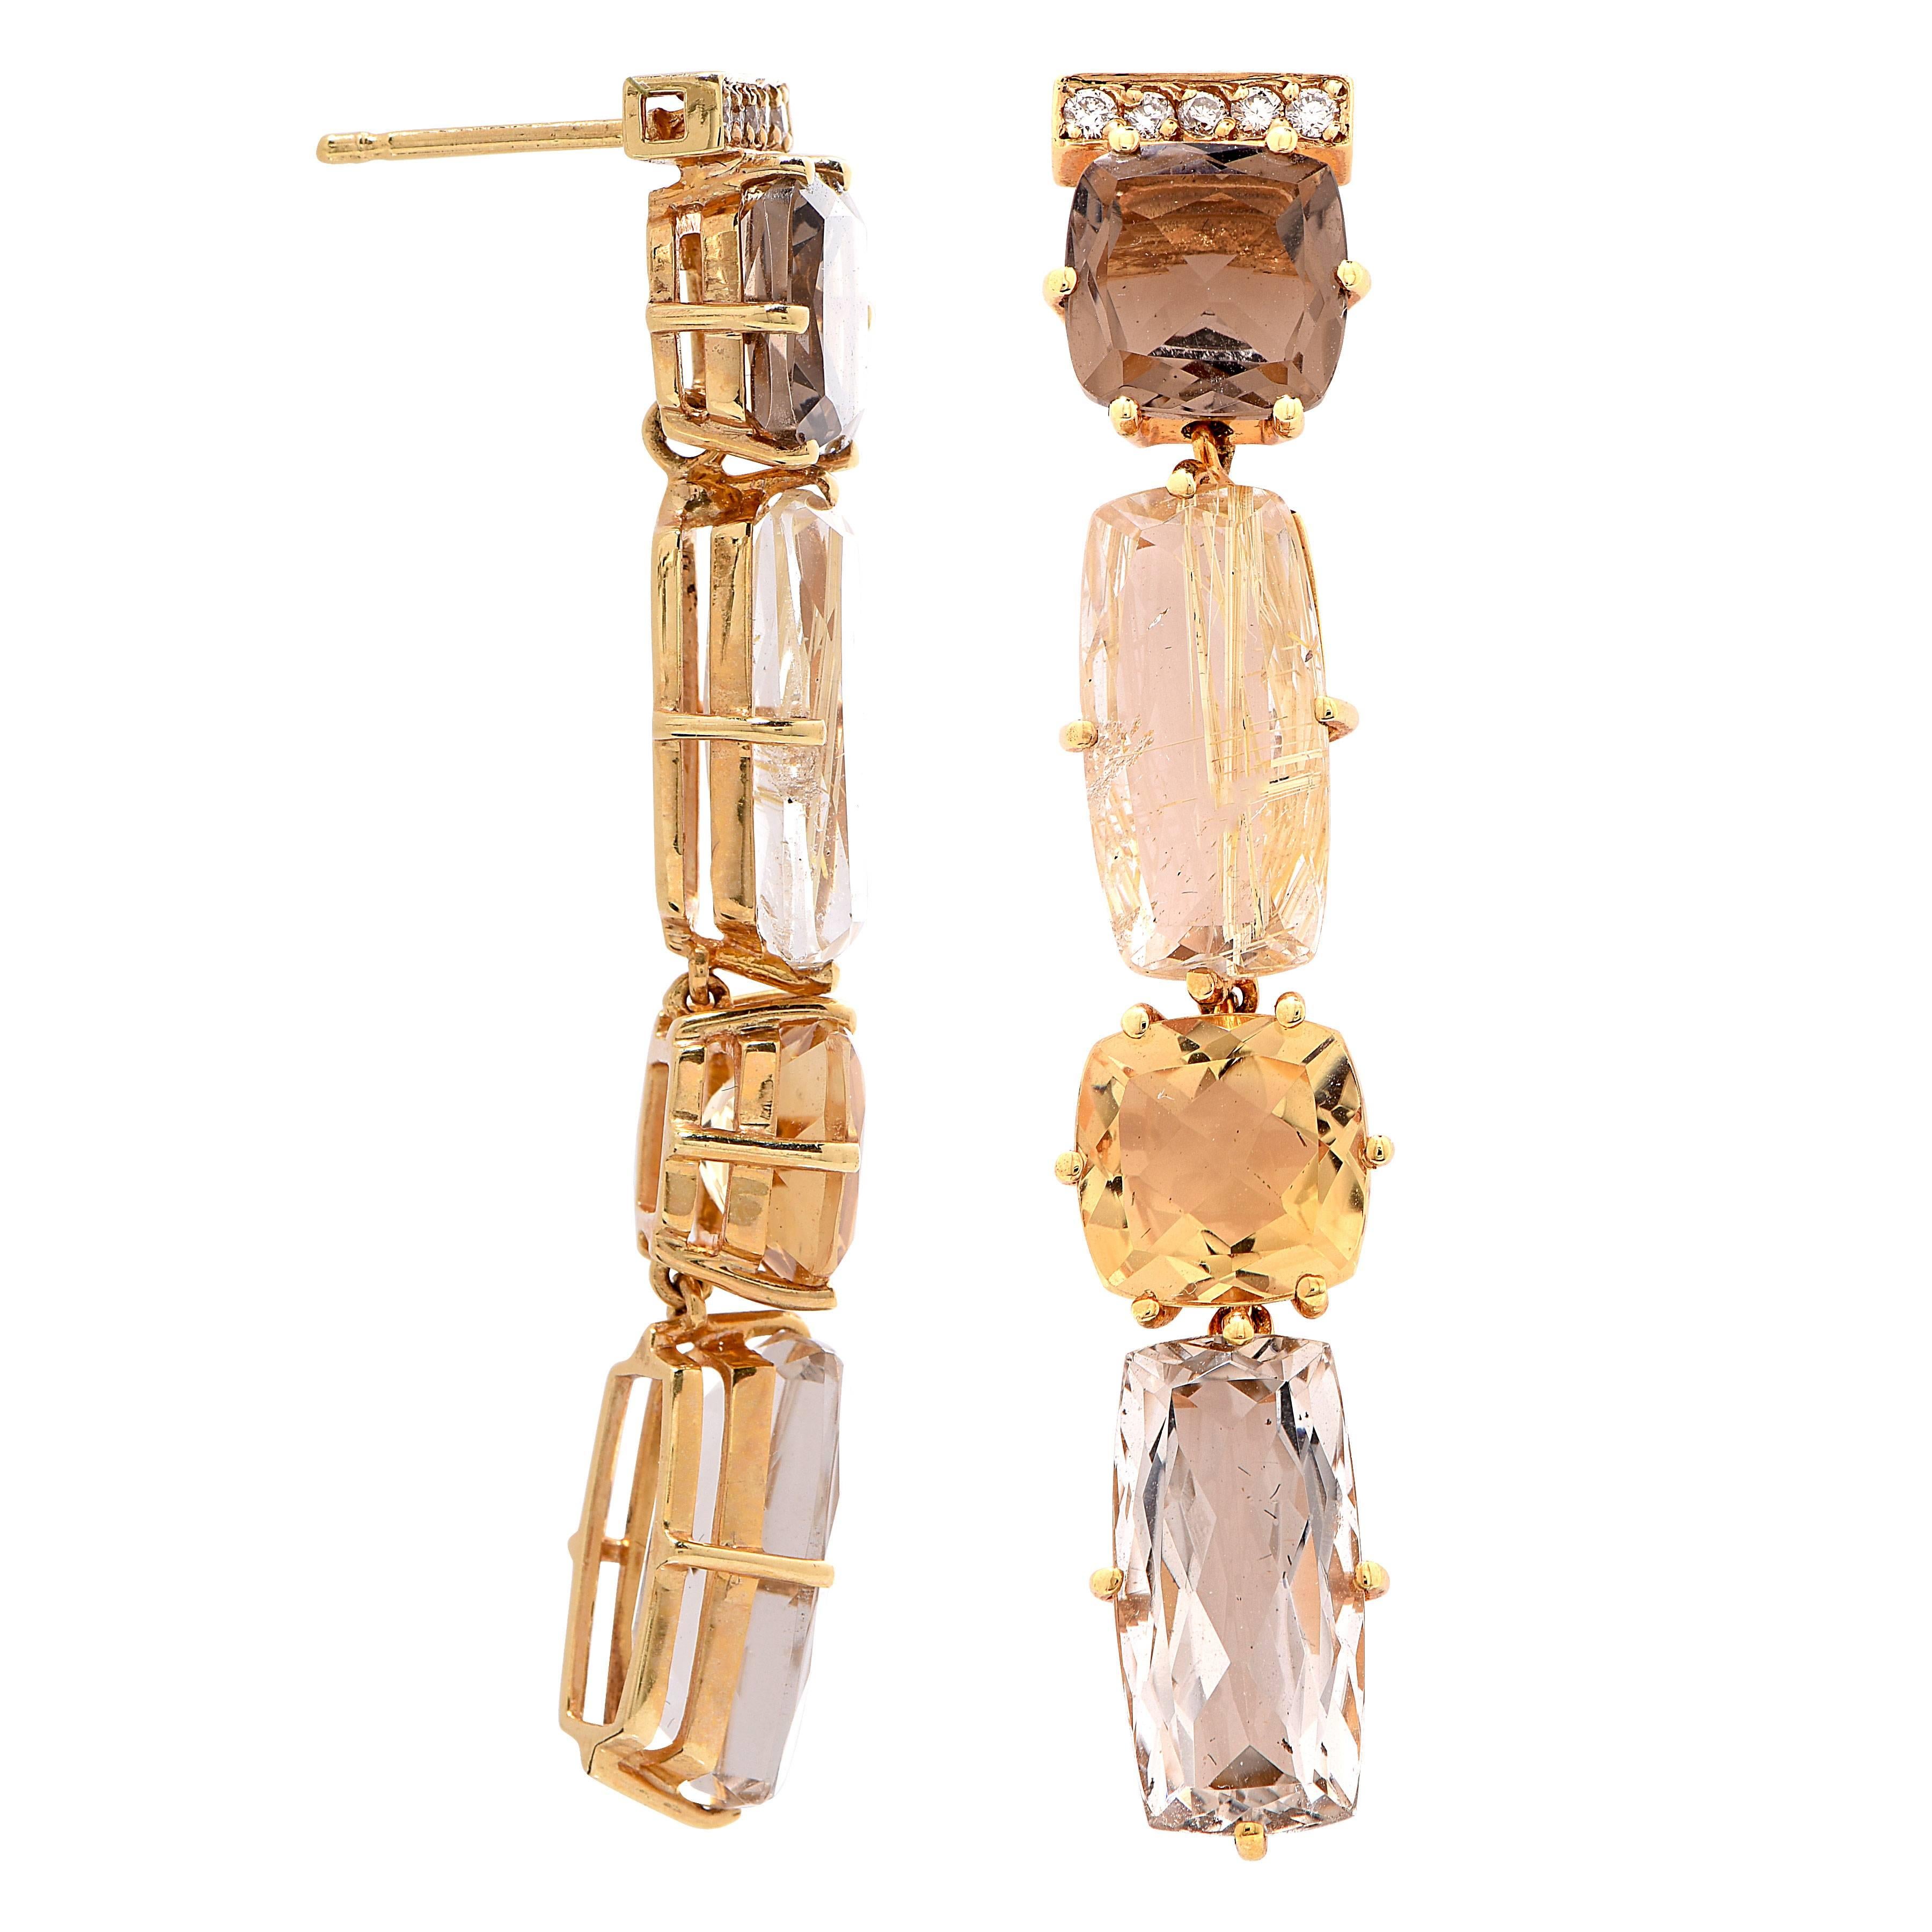 Beautiful rutilated smoky and murion quartz and citrine and diamonds drop yellow gold earrings set in 18 Karat Yellow Gold. These earrings feature 10 round cut diamonds with an estimated total weight of .15 carat and citrine and quartz with an